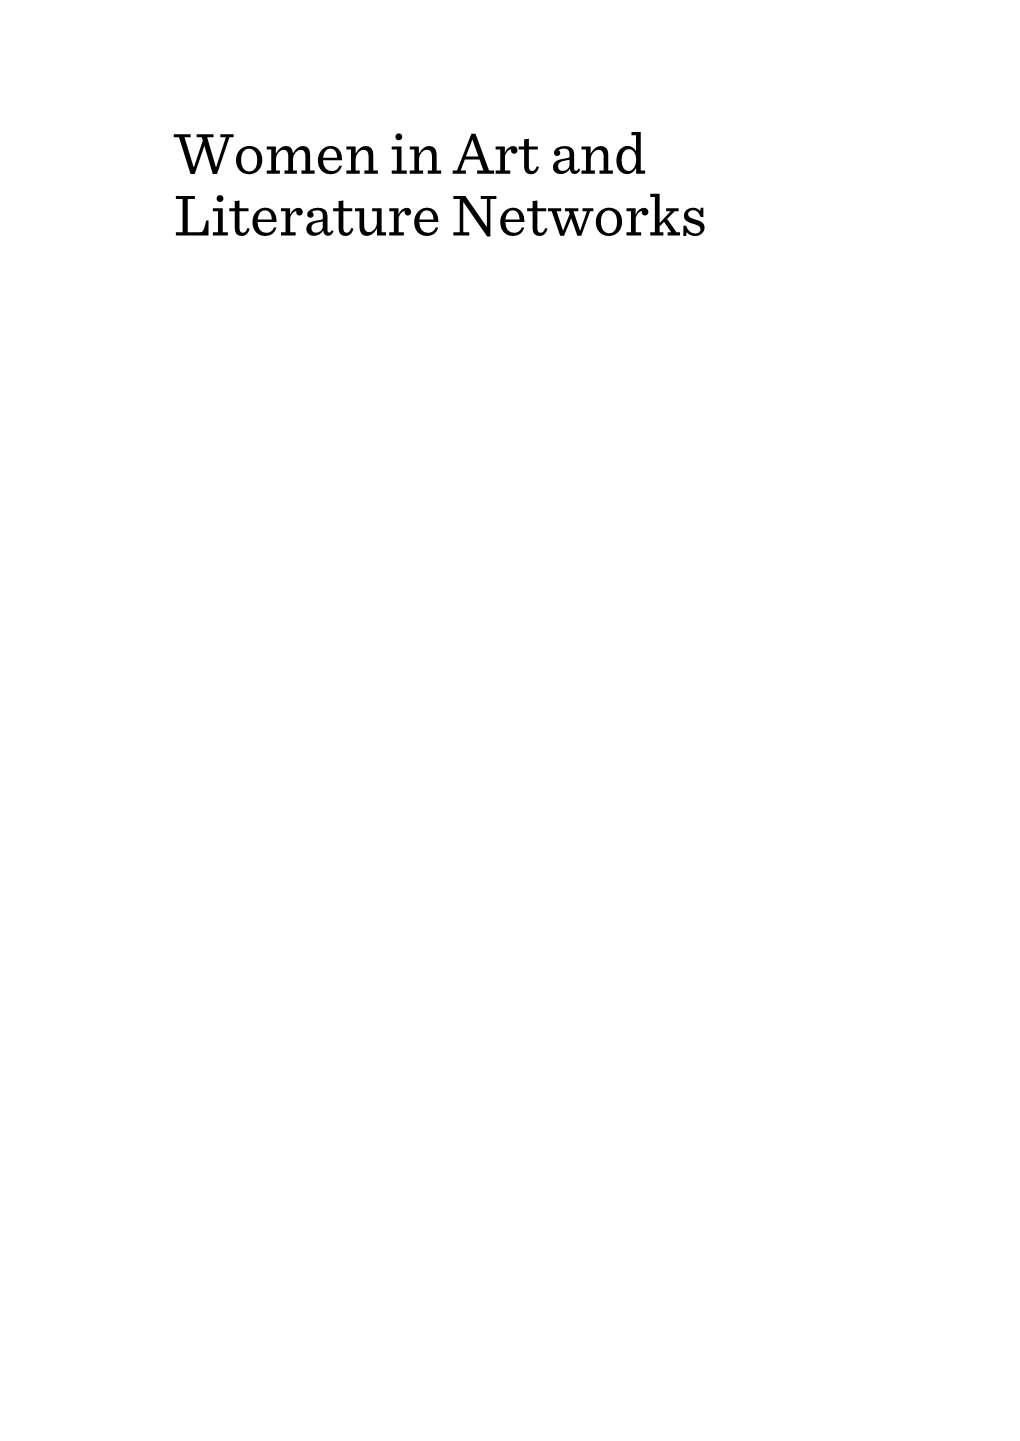 Women in Art and Literature Networks